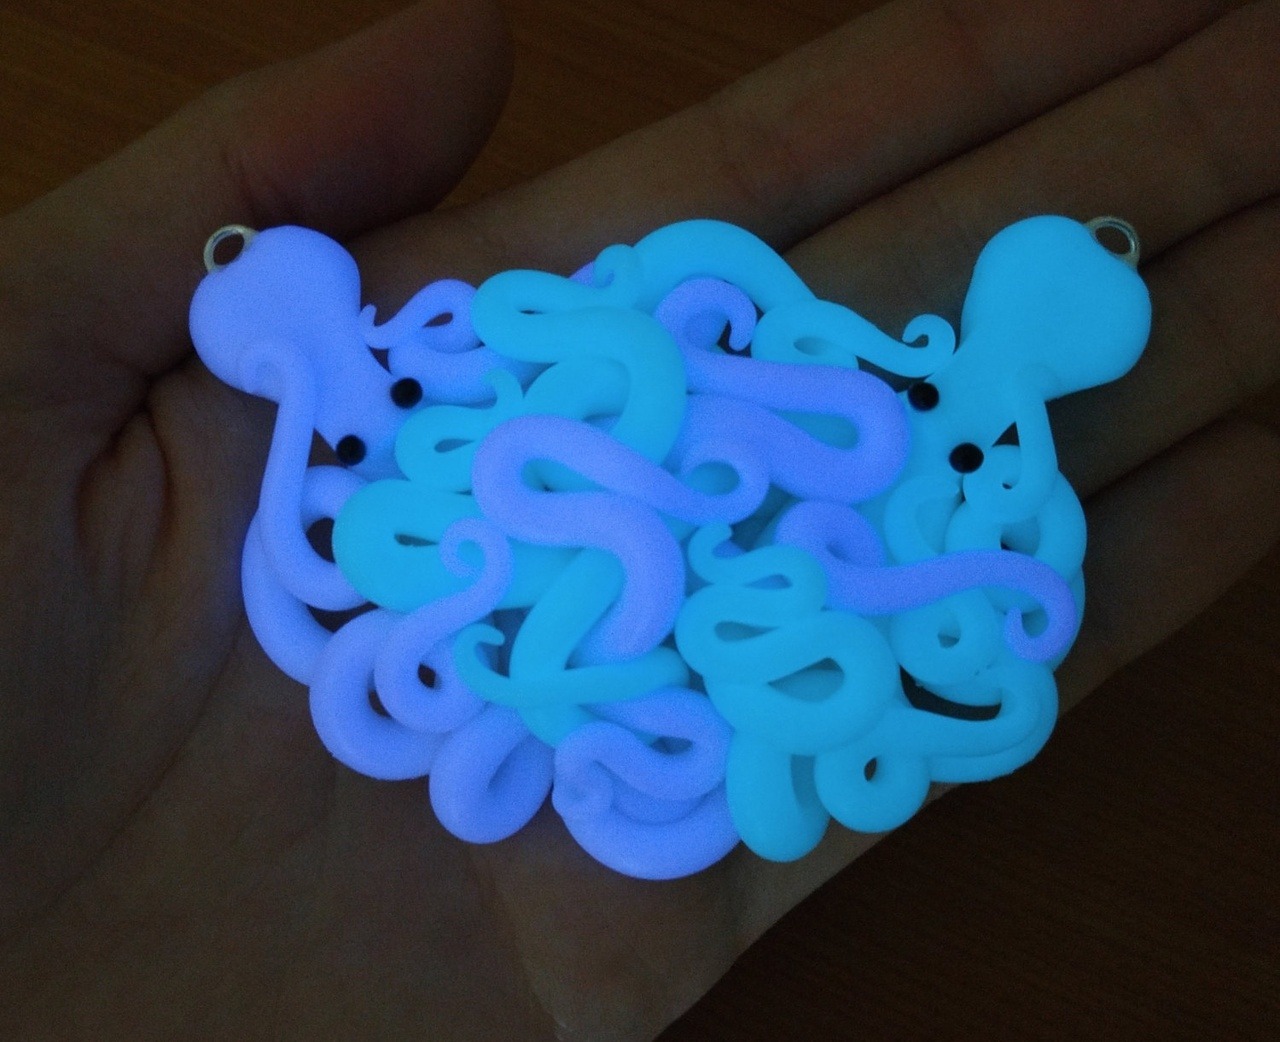 Octopus Jewelry - including Glow-in-the-Dark - and...